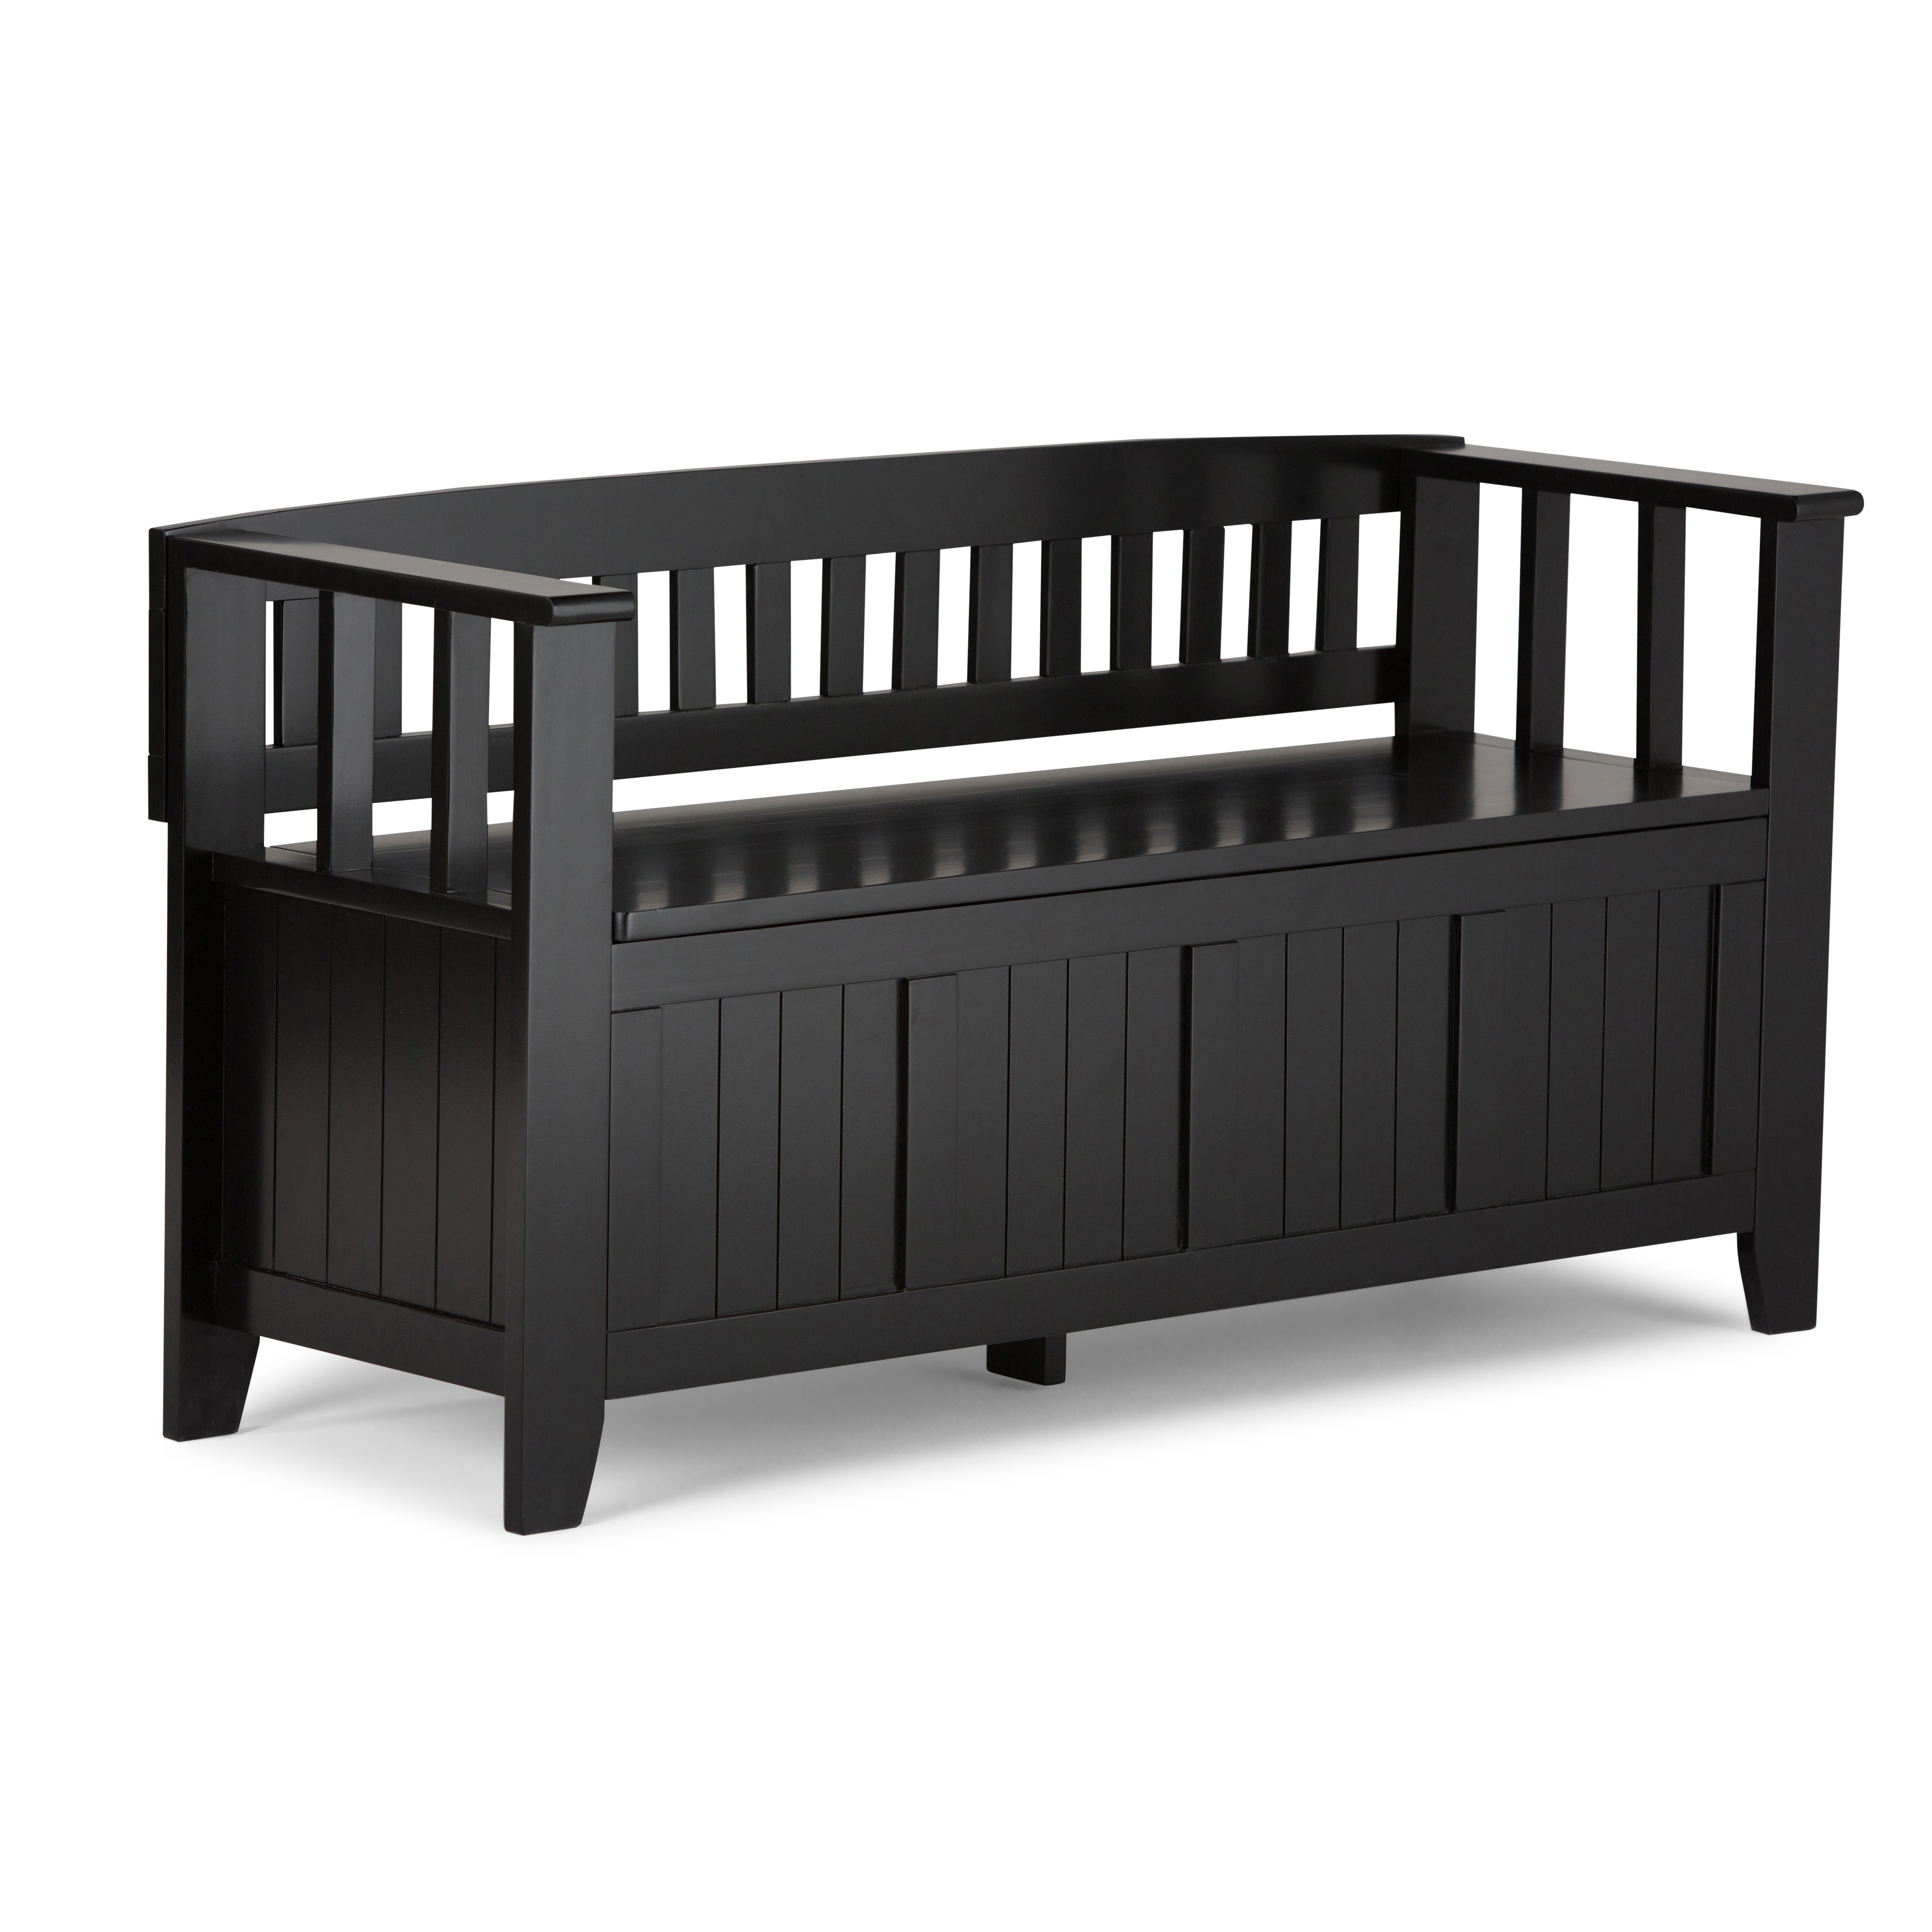 Simpli Home Acadian SOLID WOOD 48 inch Wide Transitional Entryway Storage Bench in Black